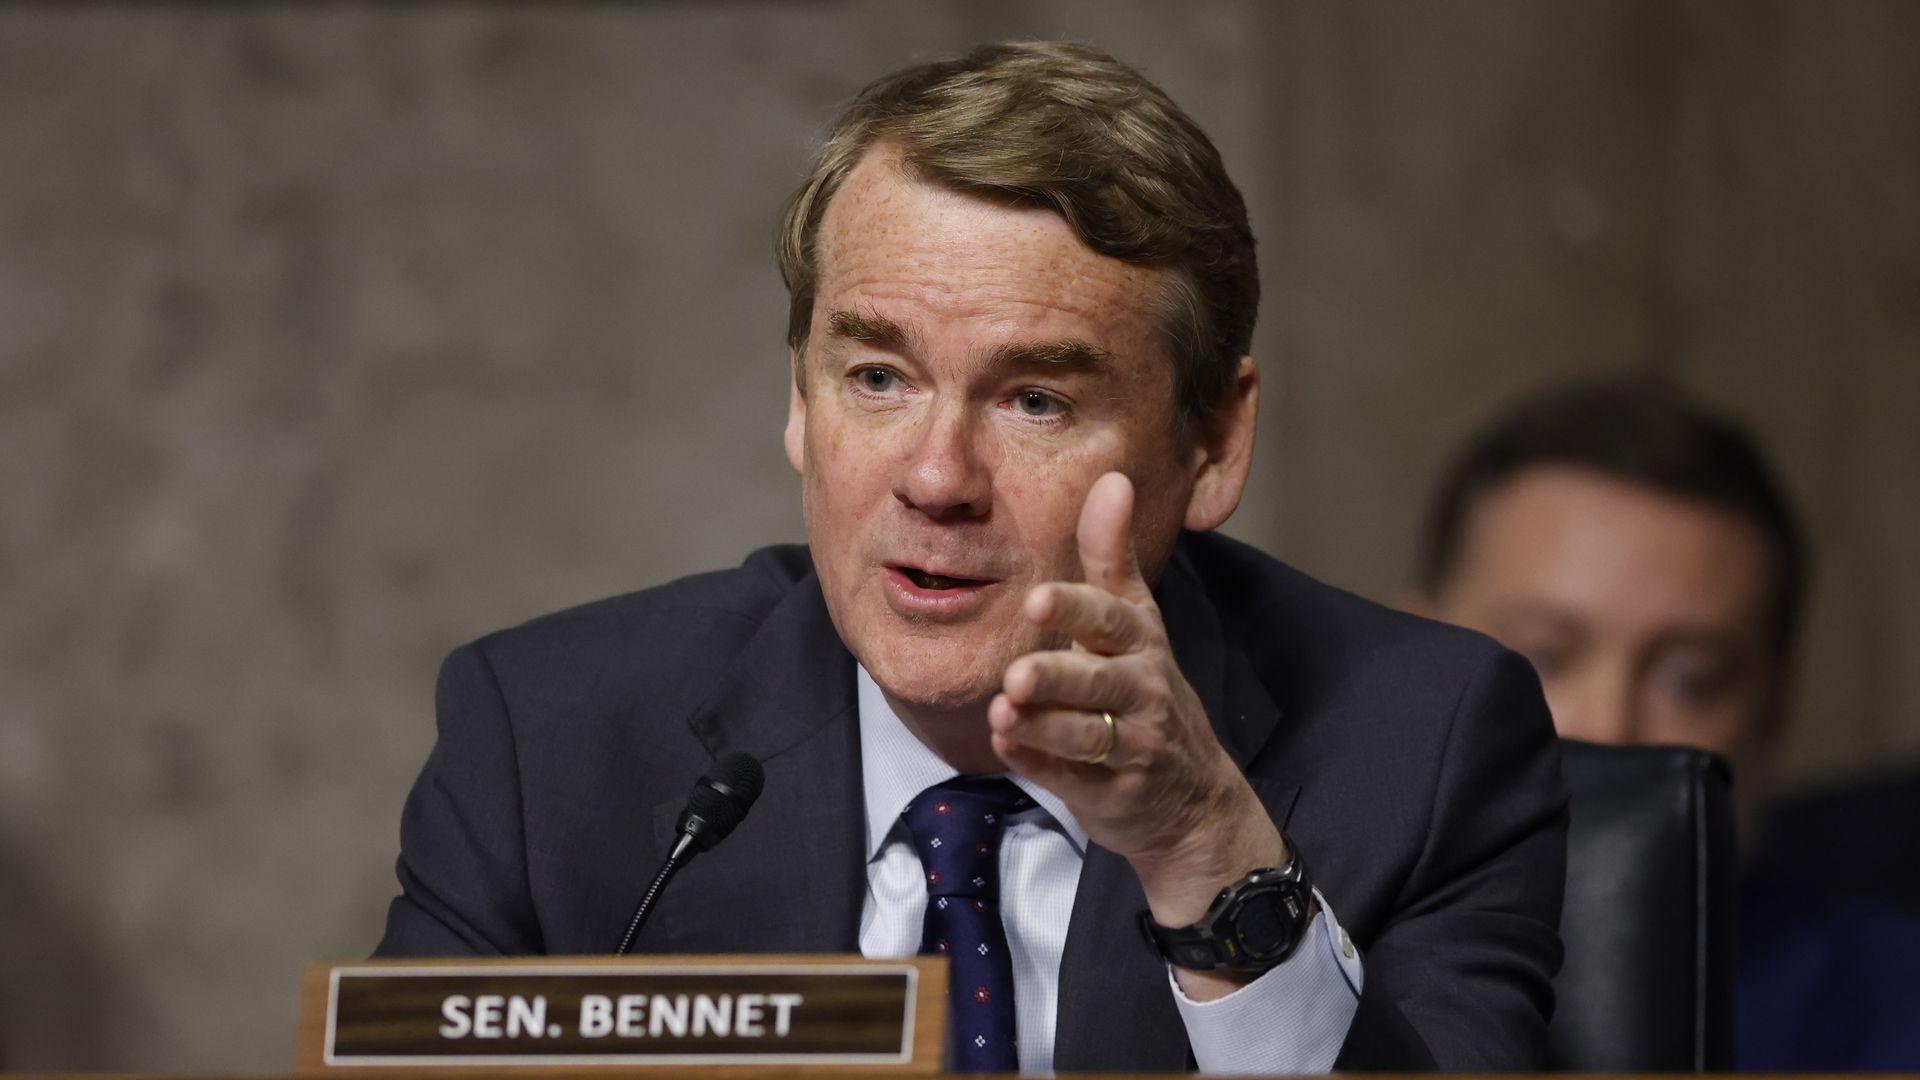 Senator Michael Bennet asks a question at a hearing, gesturing with his hand.